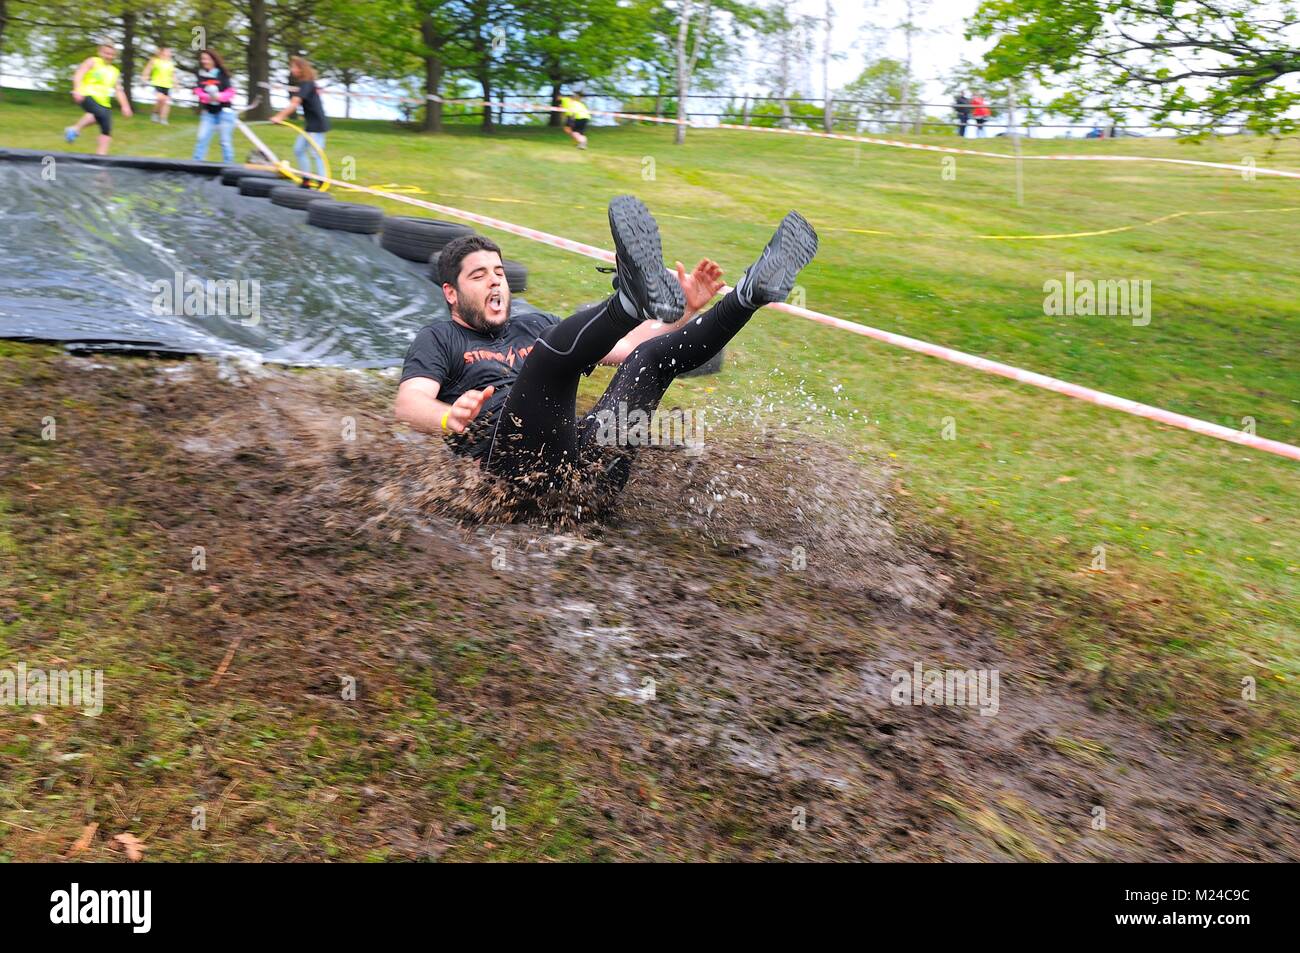 OVIEDO, SPAIN - MAY 9: Storm Race, an extreme obstacle course in May 9, 2015 in Oviedo, Spain. Runner sliding down a water slide Stock Photo